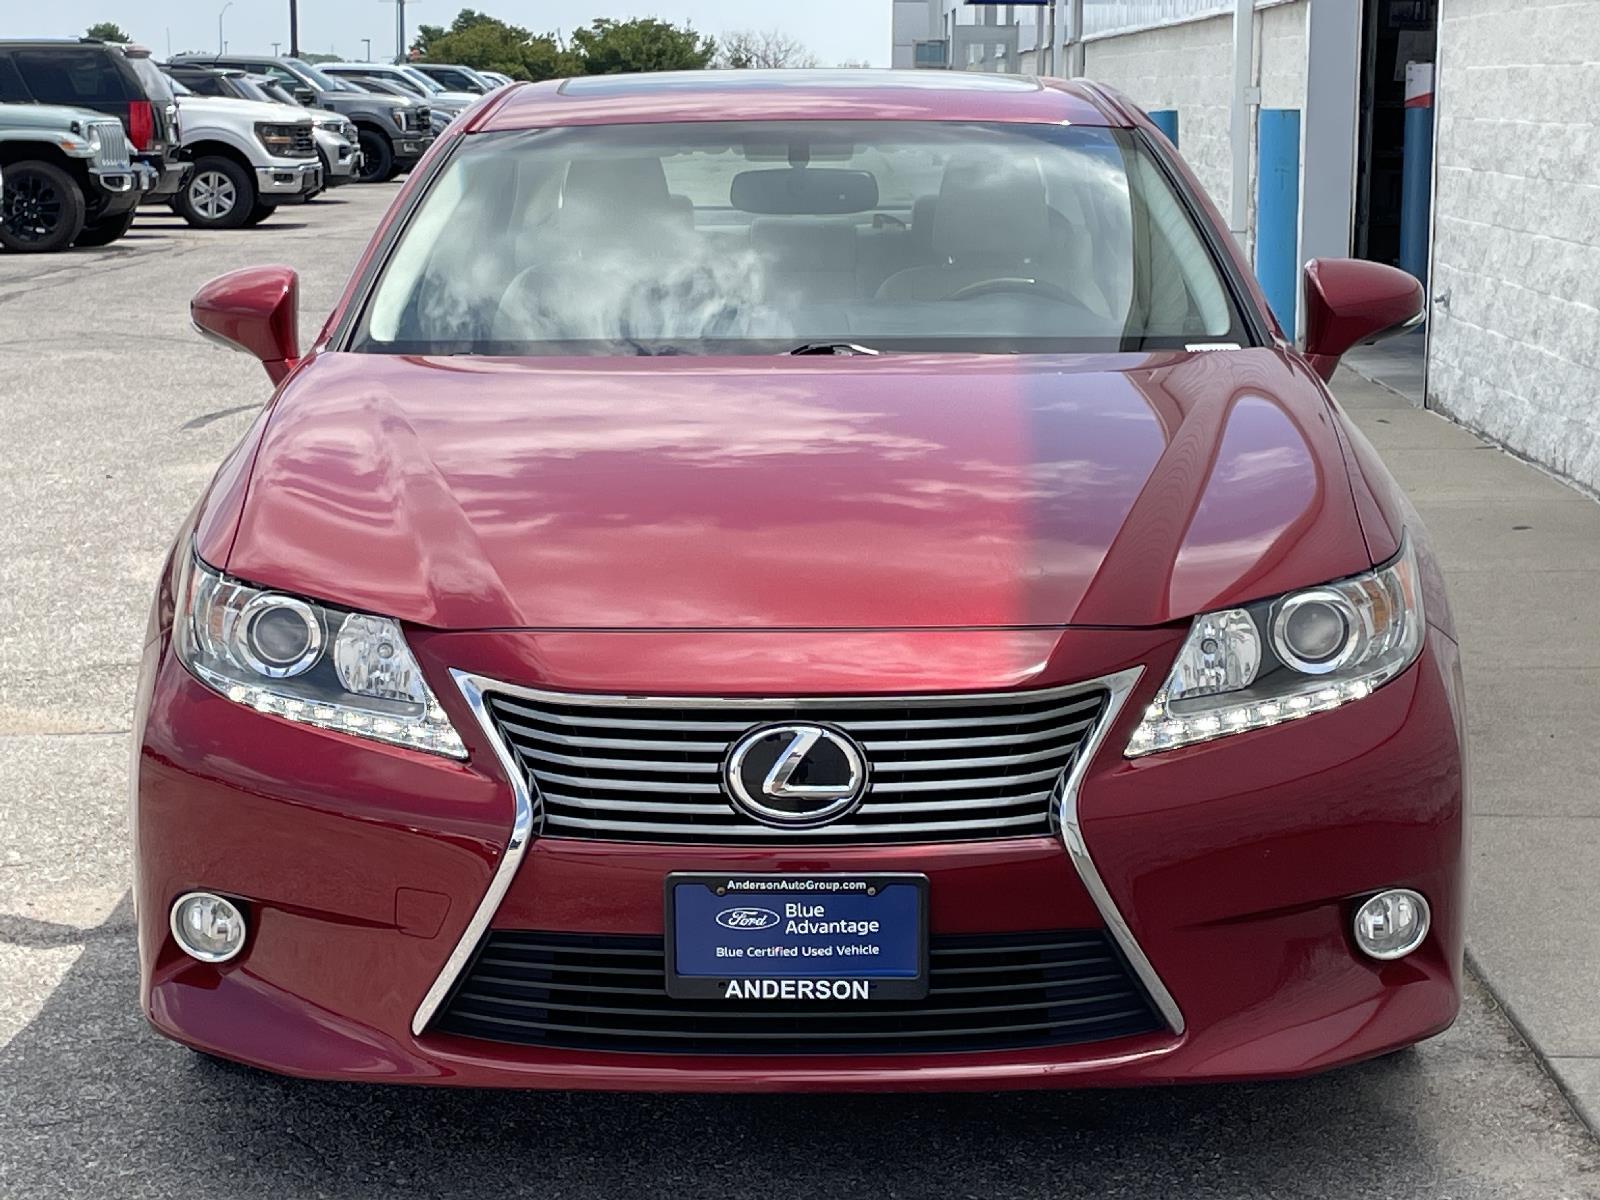 Used 2015 Lexus ES 350 Crafted Line Sedan for sale in Lincoln NE